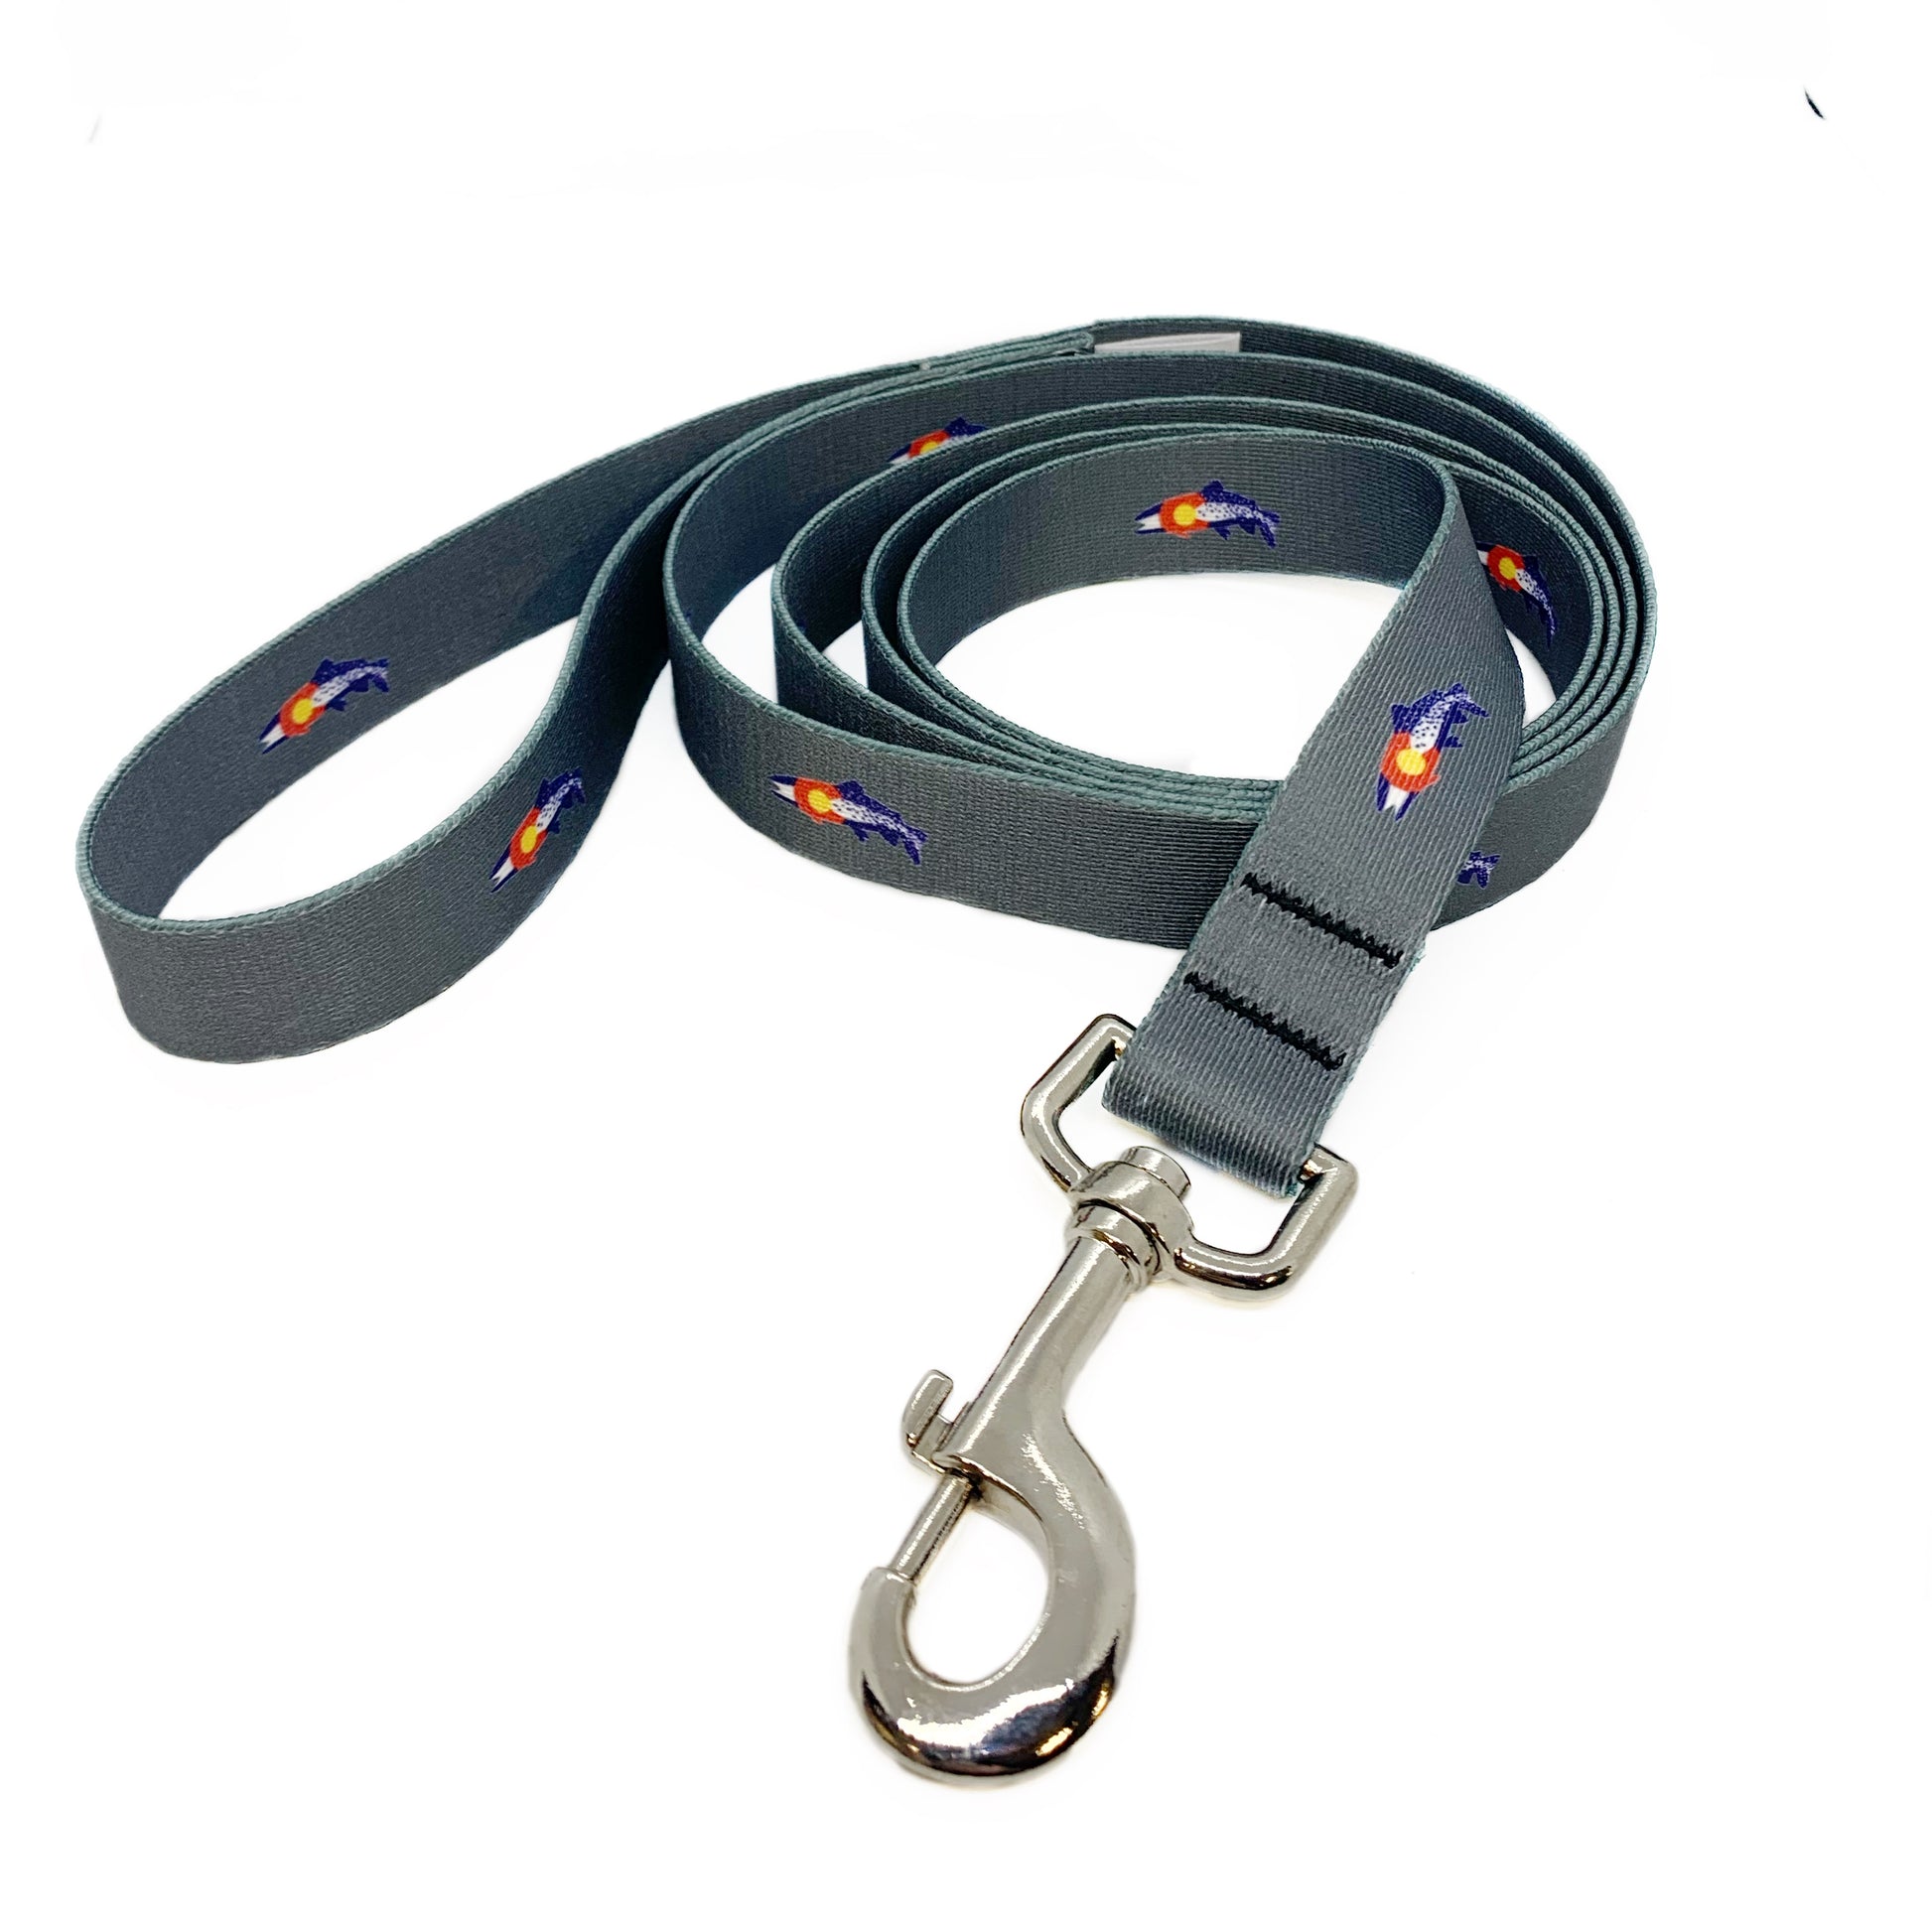 A gray nylon dog leash is shown. Trout in colorado flag colors pattern is printed on it.